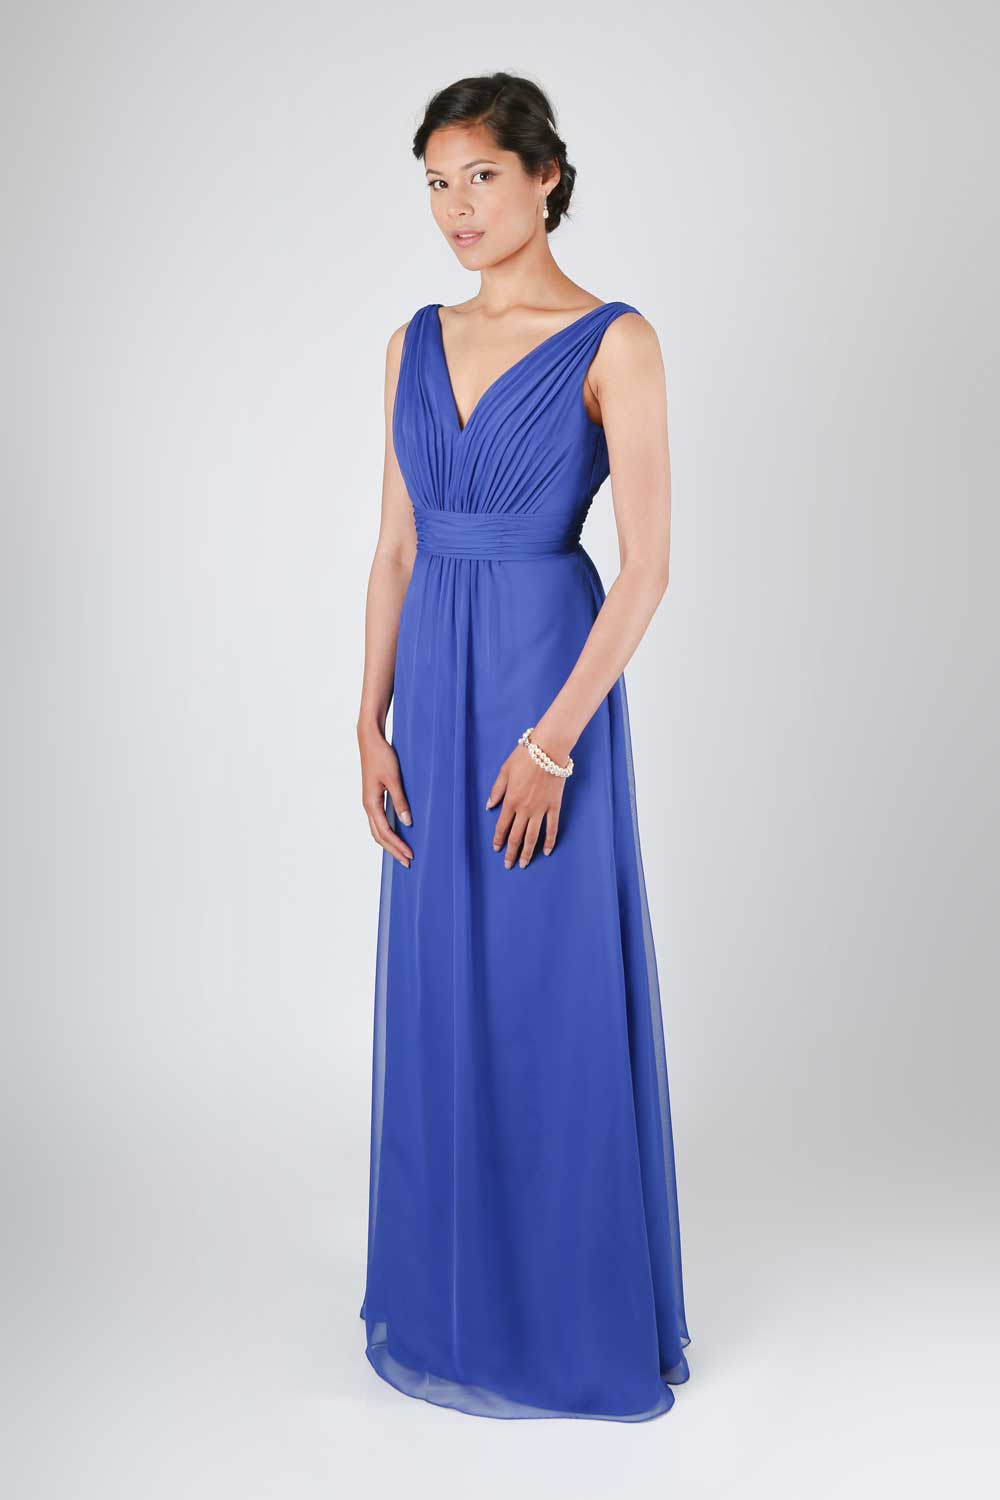 Bridesmaid dress with tapered shoulders